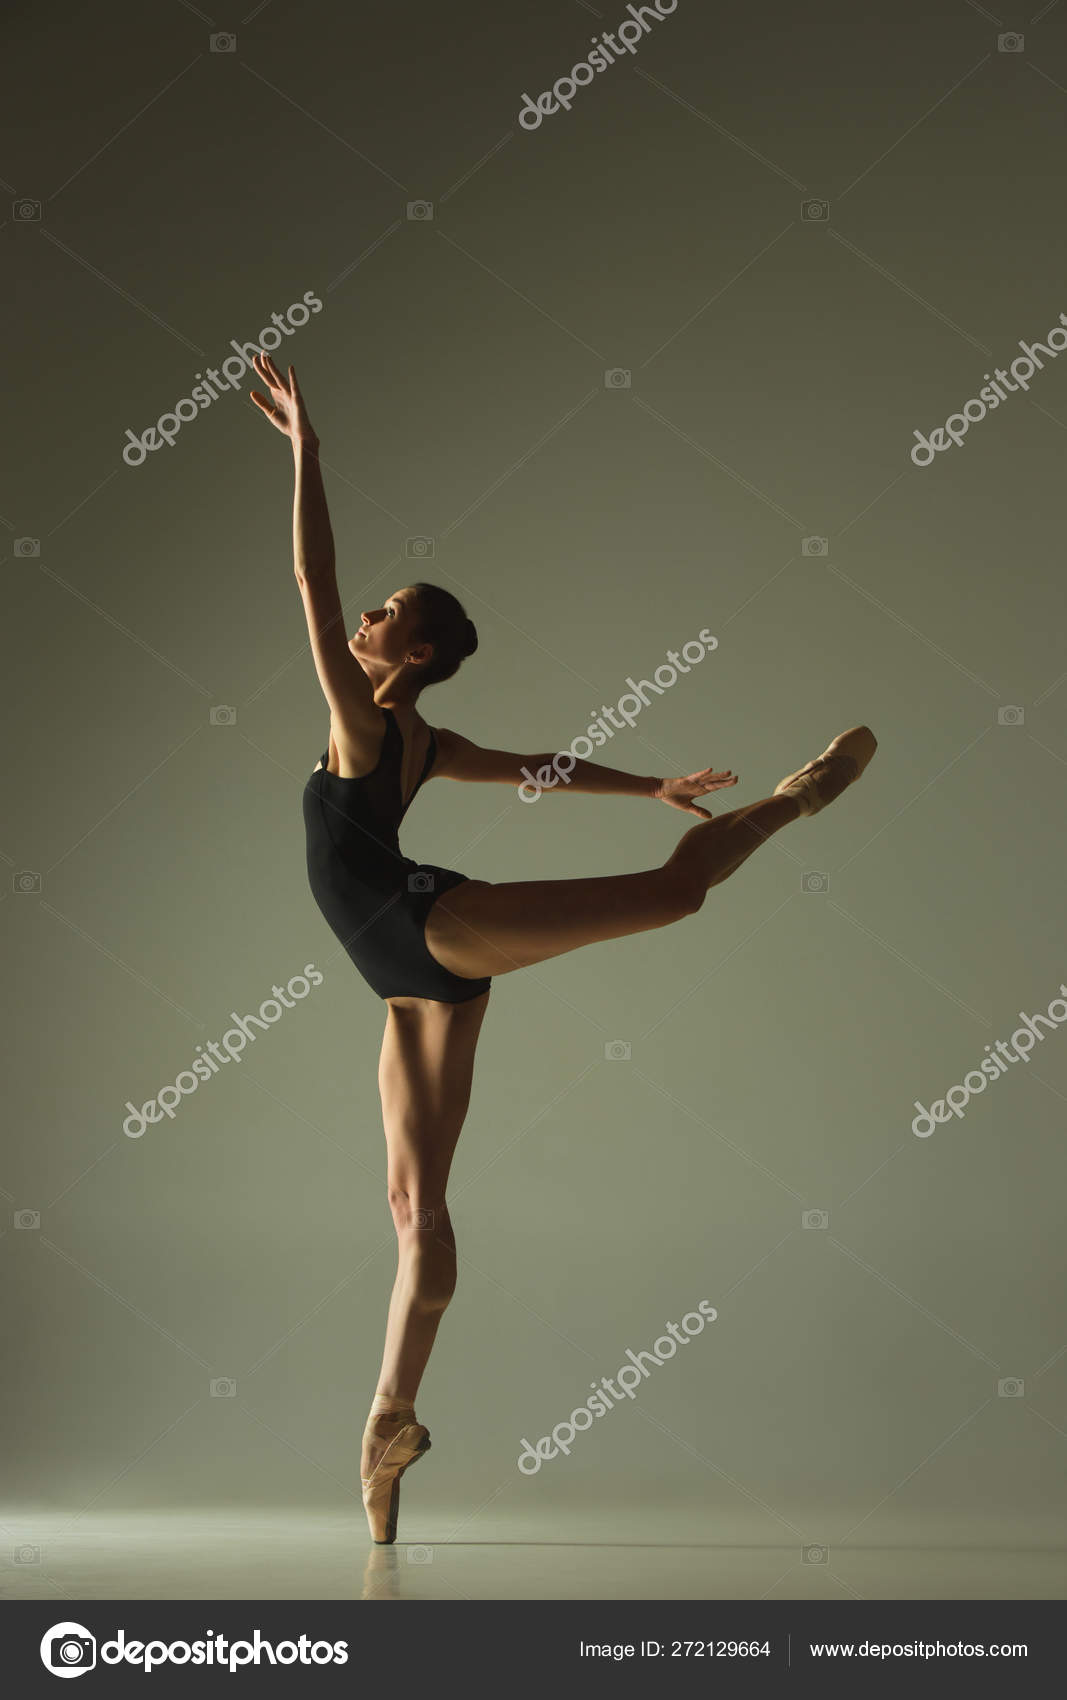 Dance positions png images | PNGWing